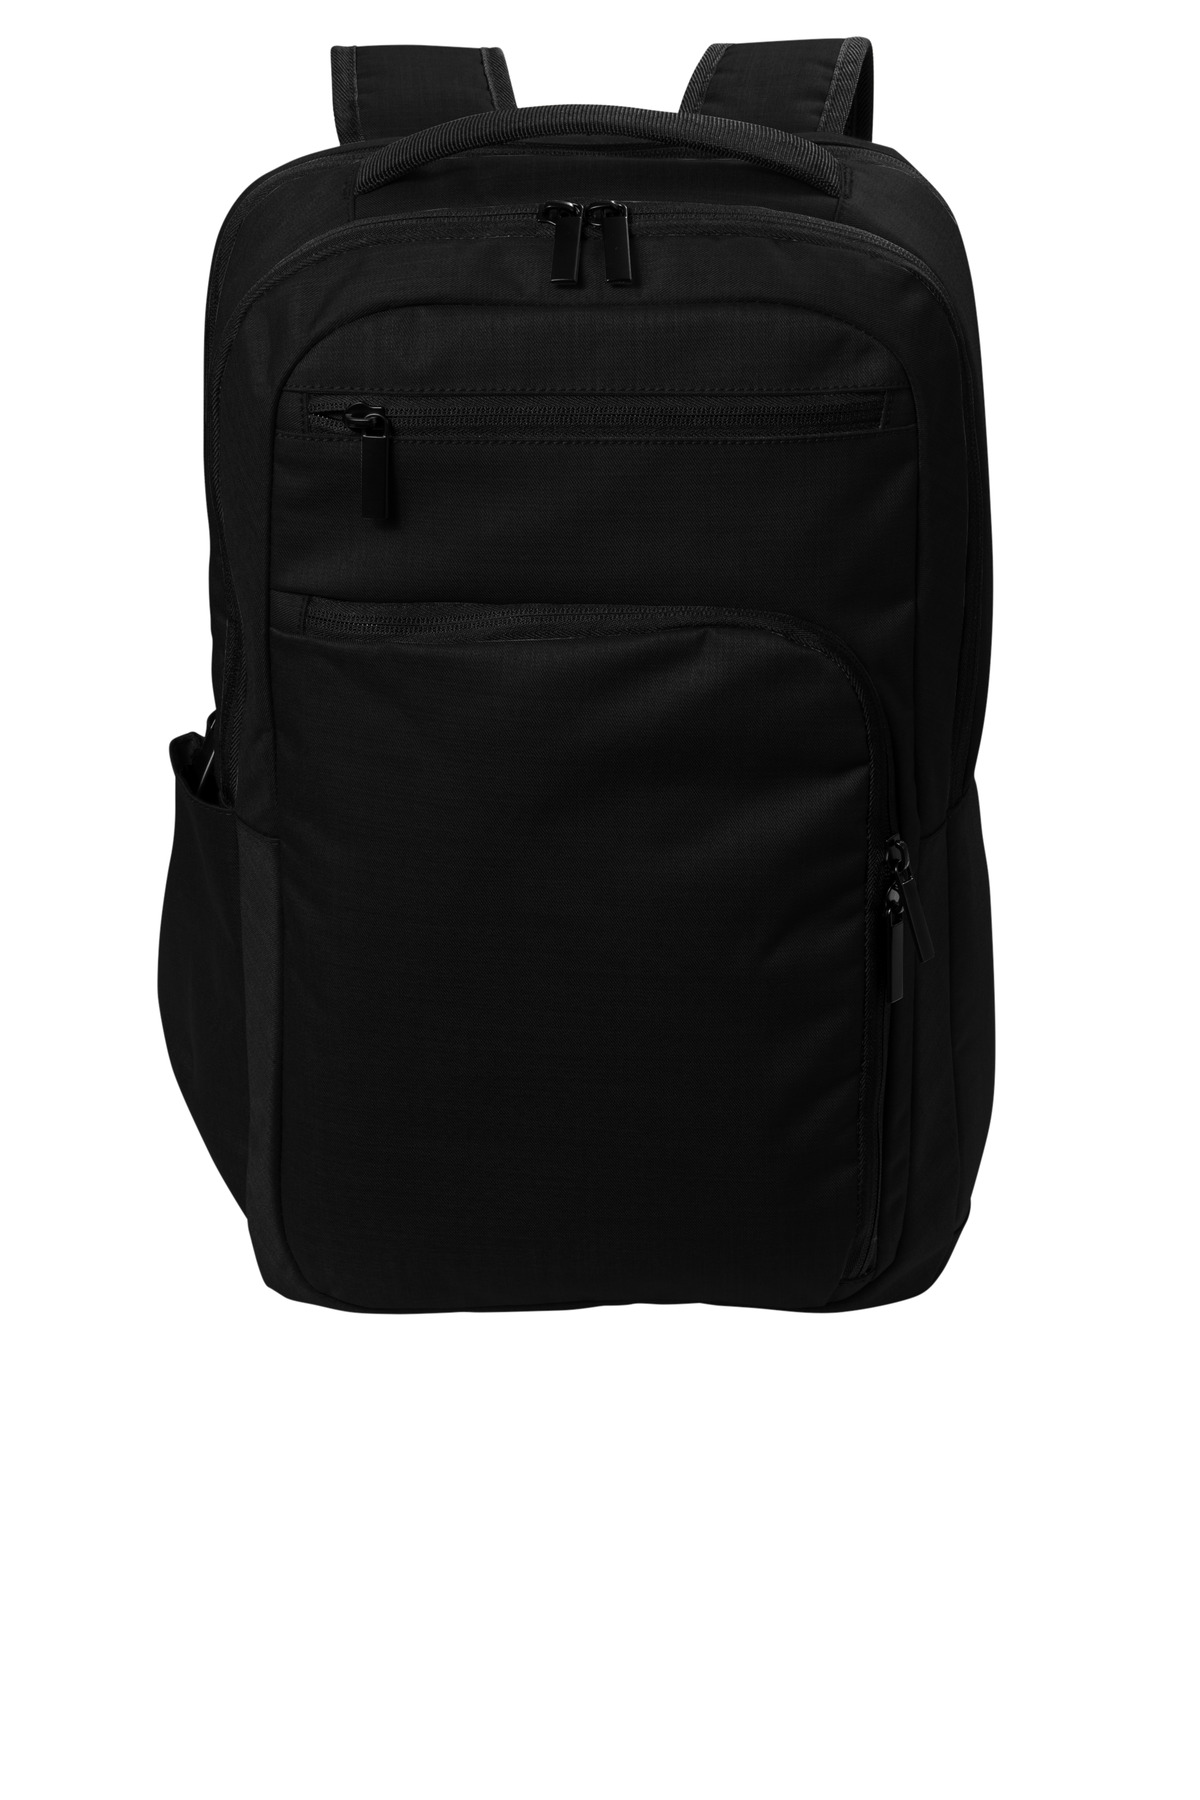 Port Authority Impact Tech Backpack-Port Authority